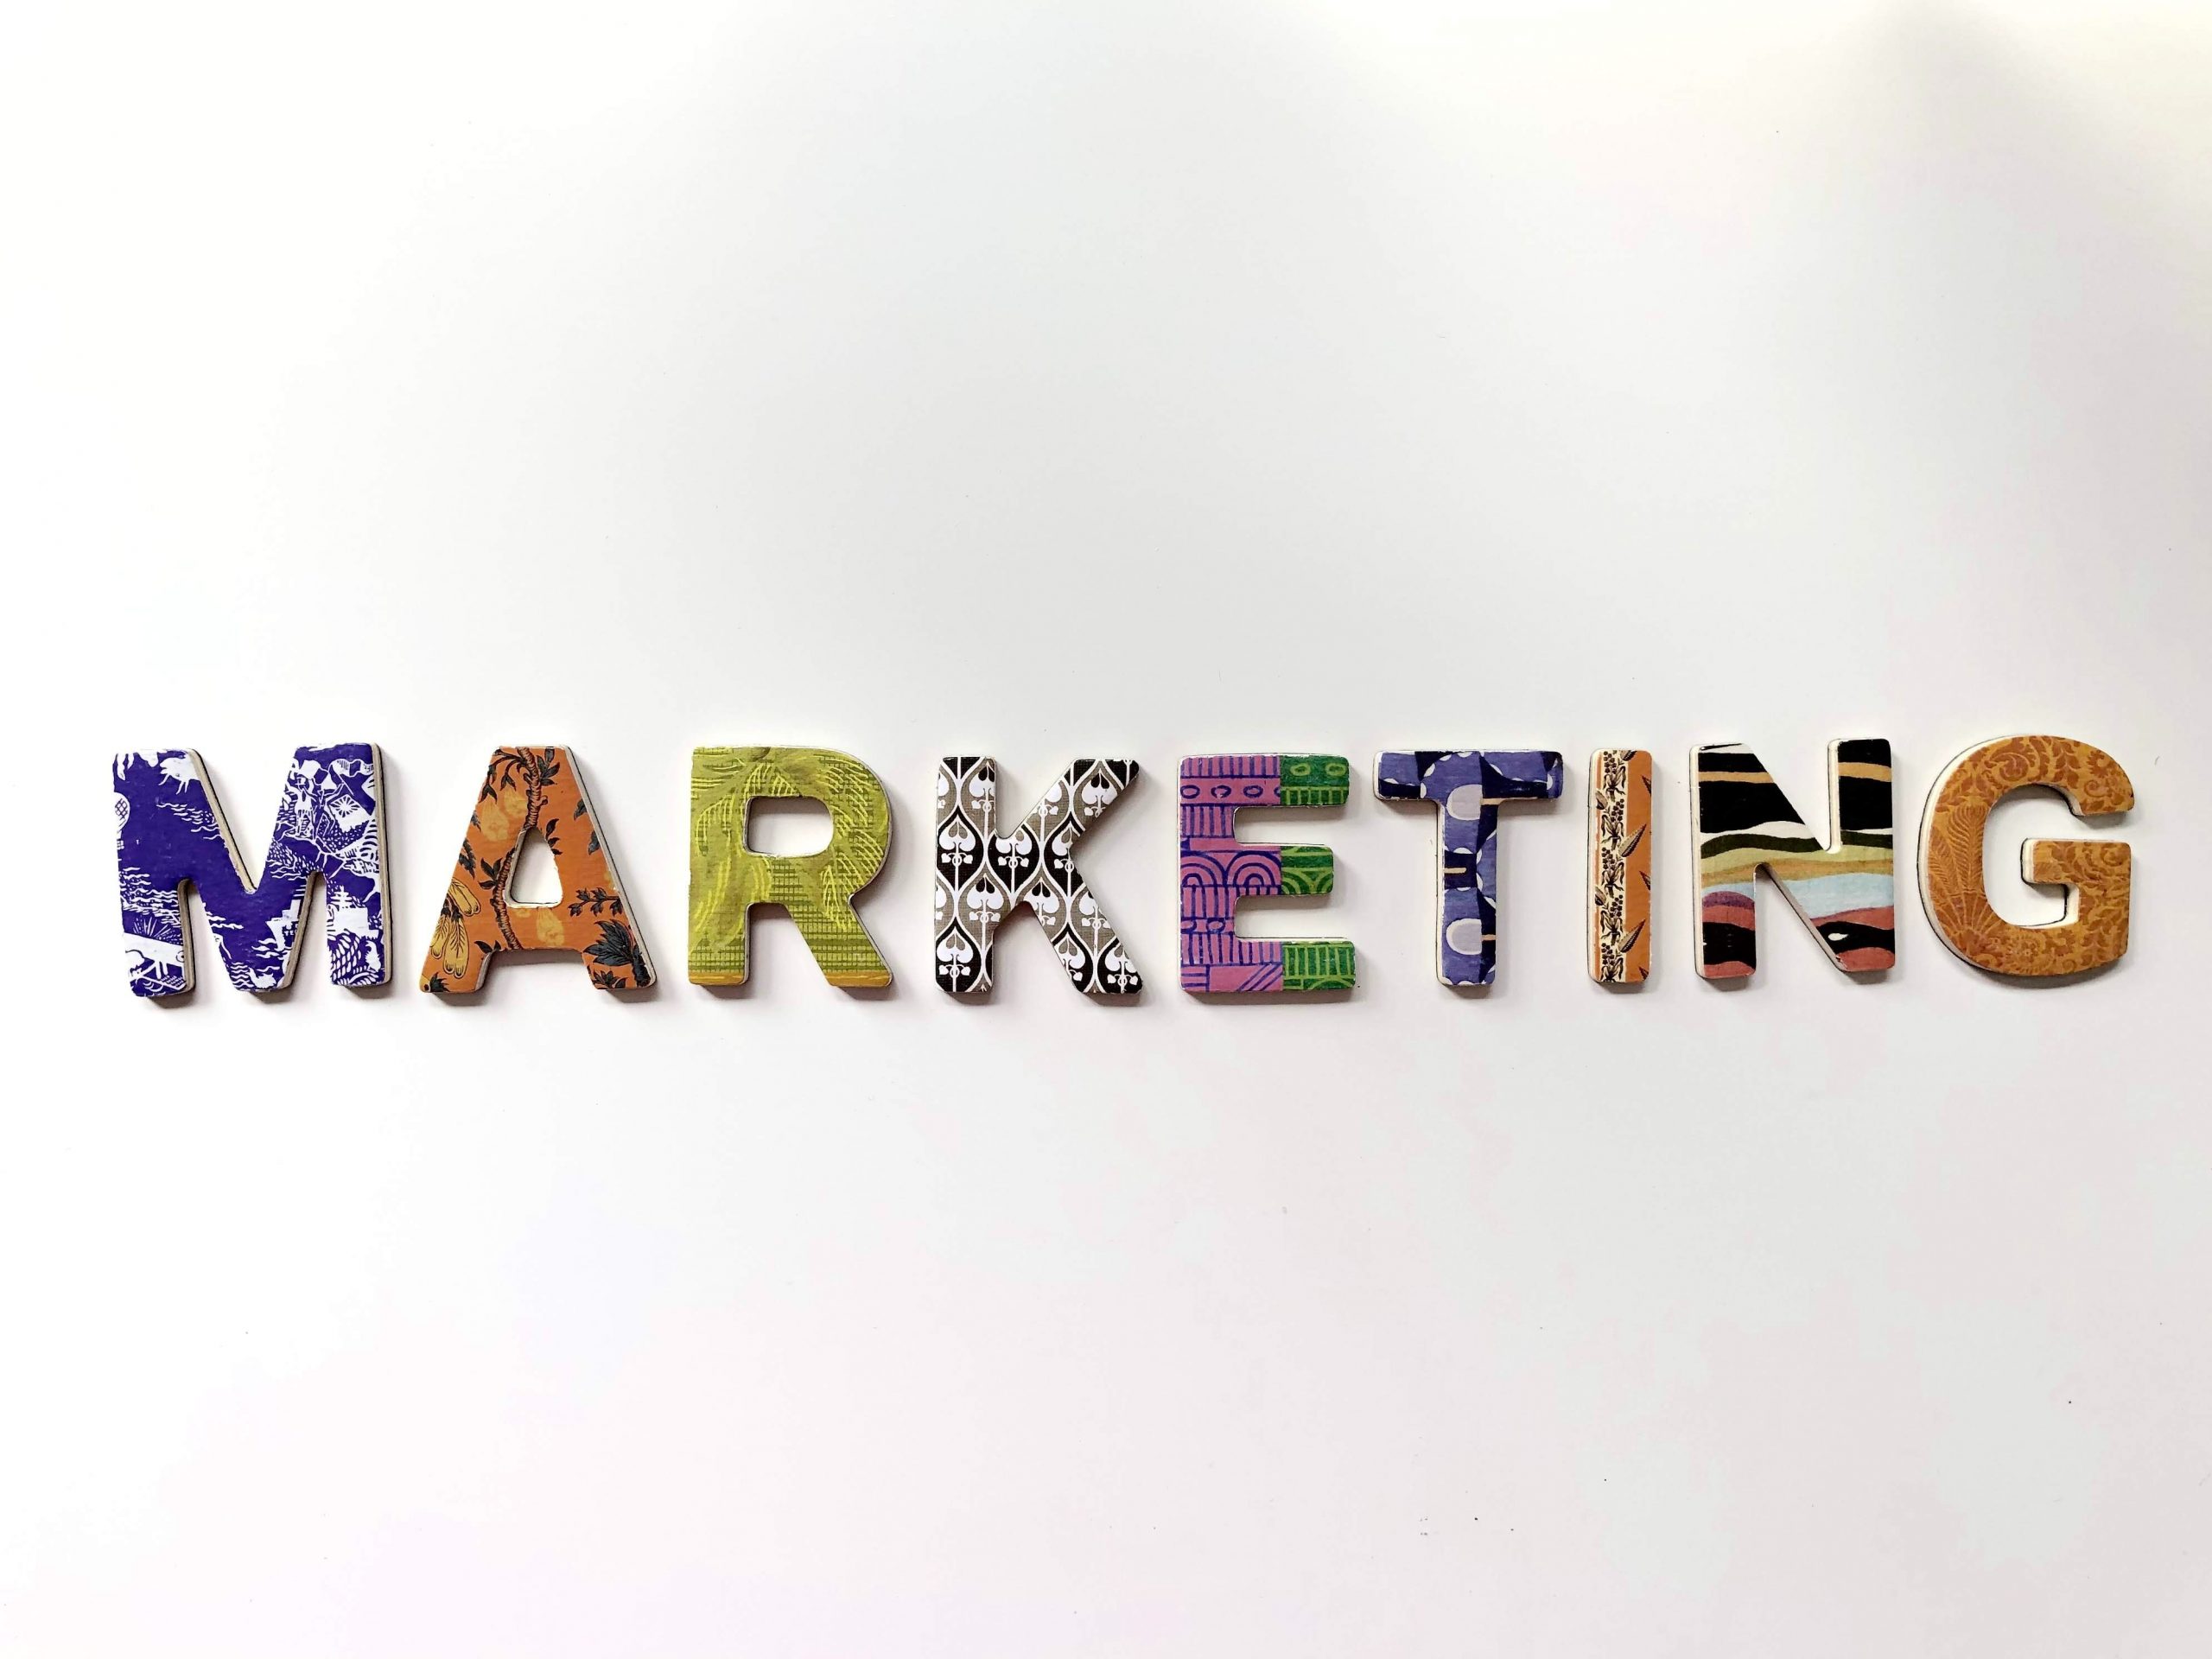 How Can You Improve Marketing?